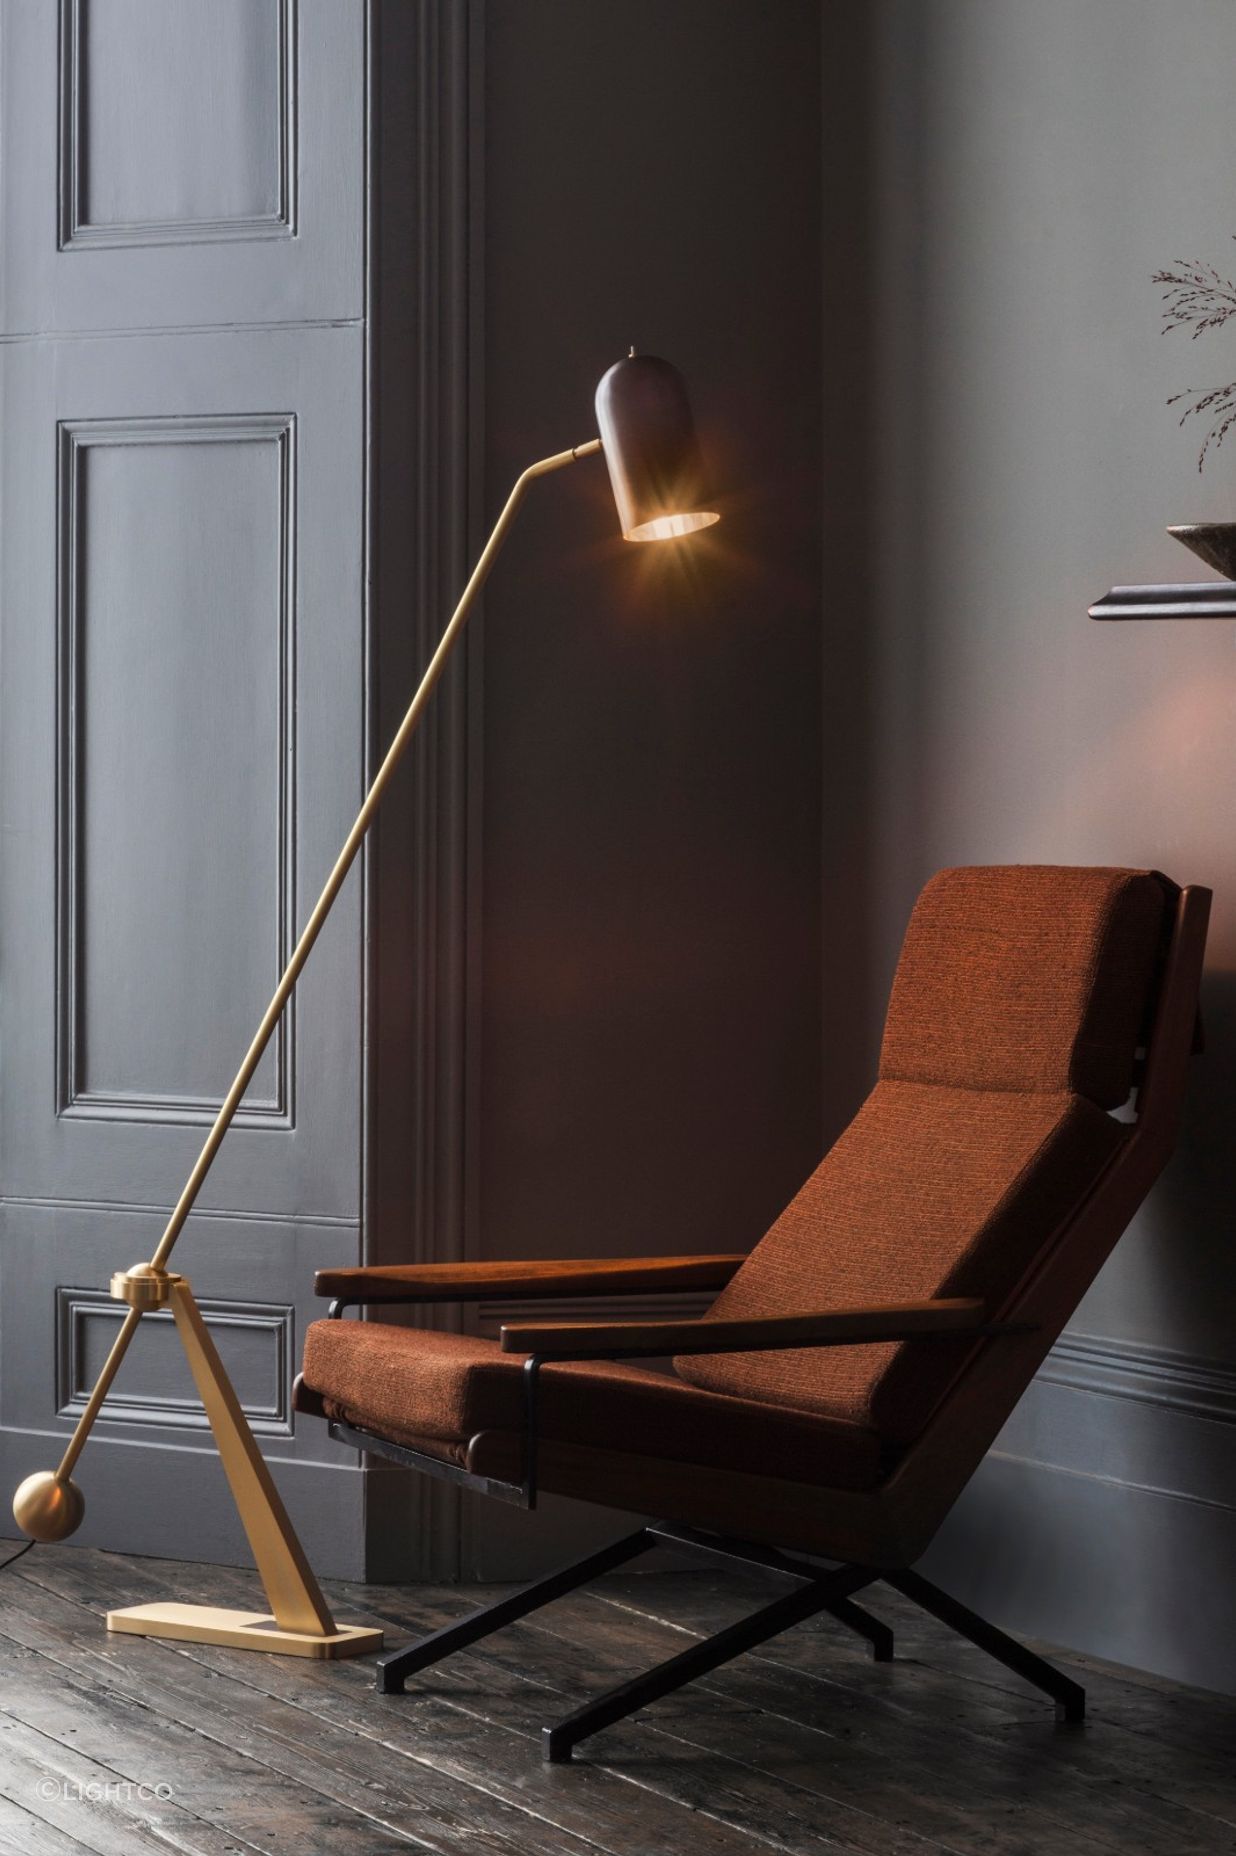 The Stasis Floor Lamp is the perfect companion for reading a good book in a comfy armchair.